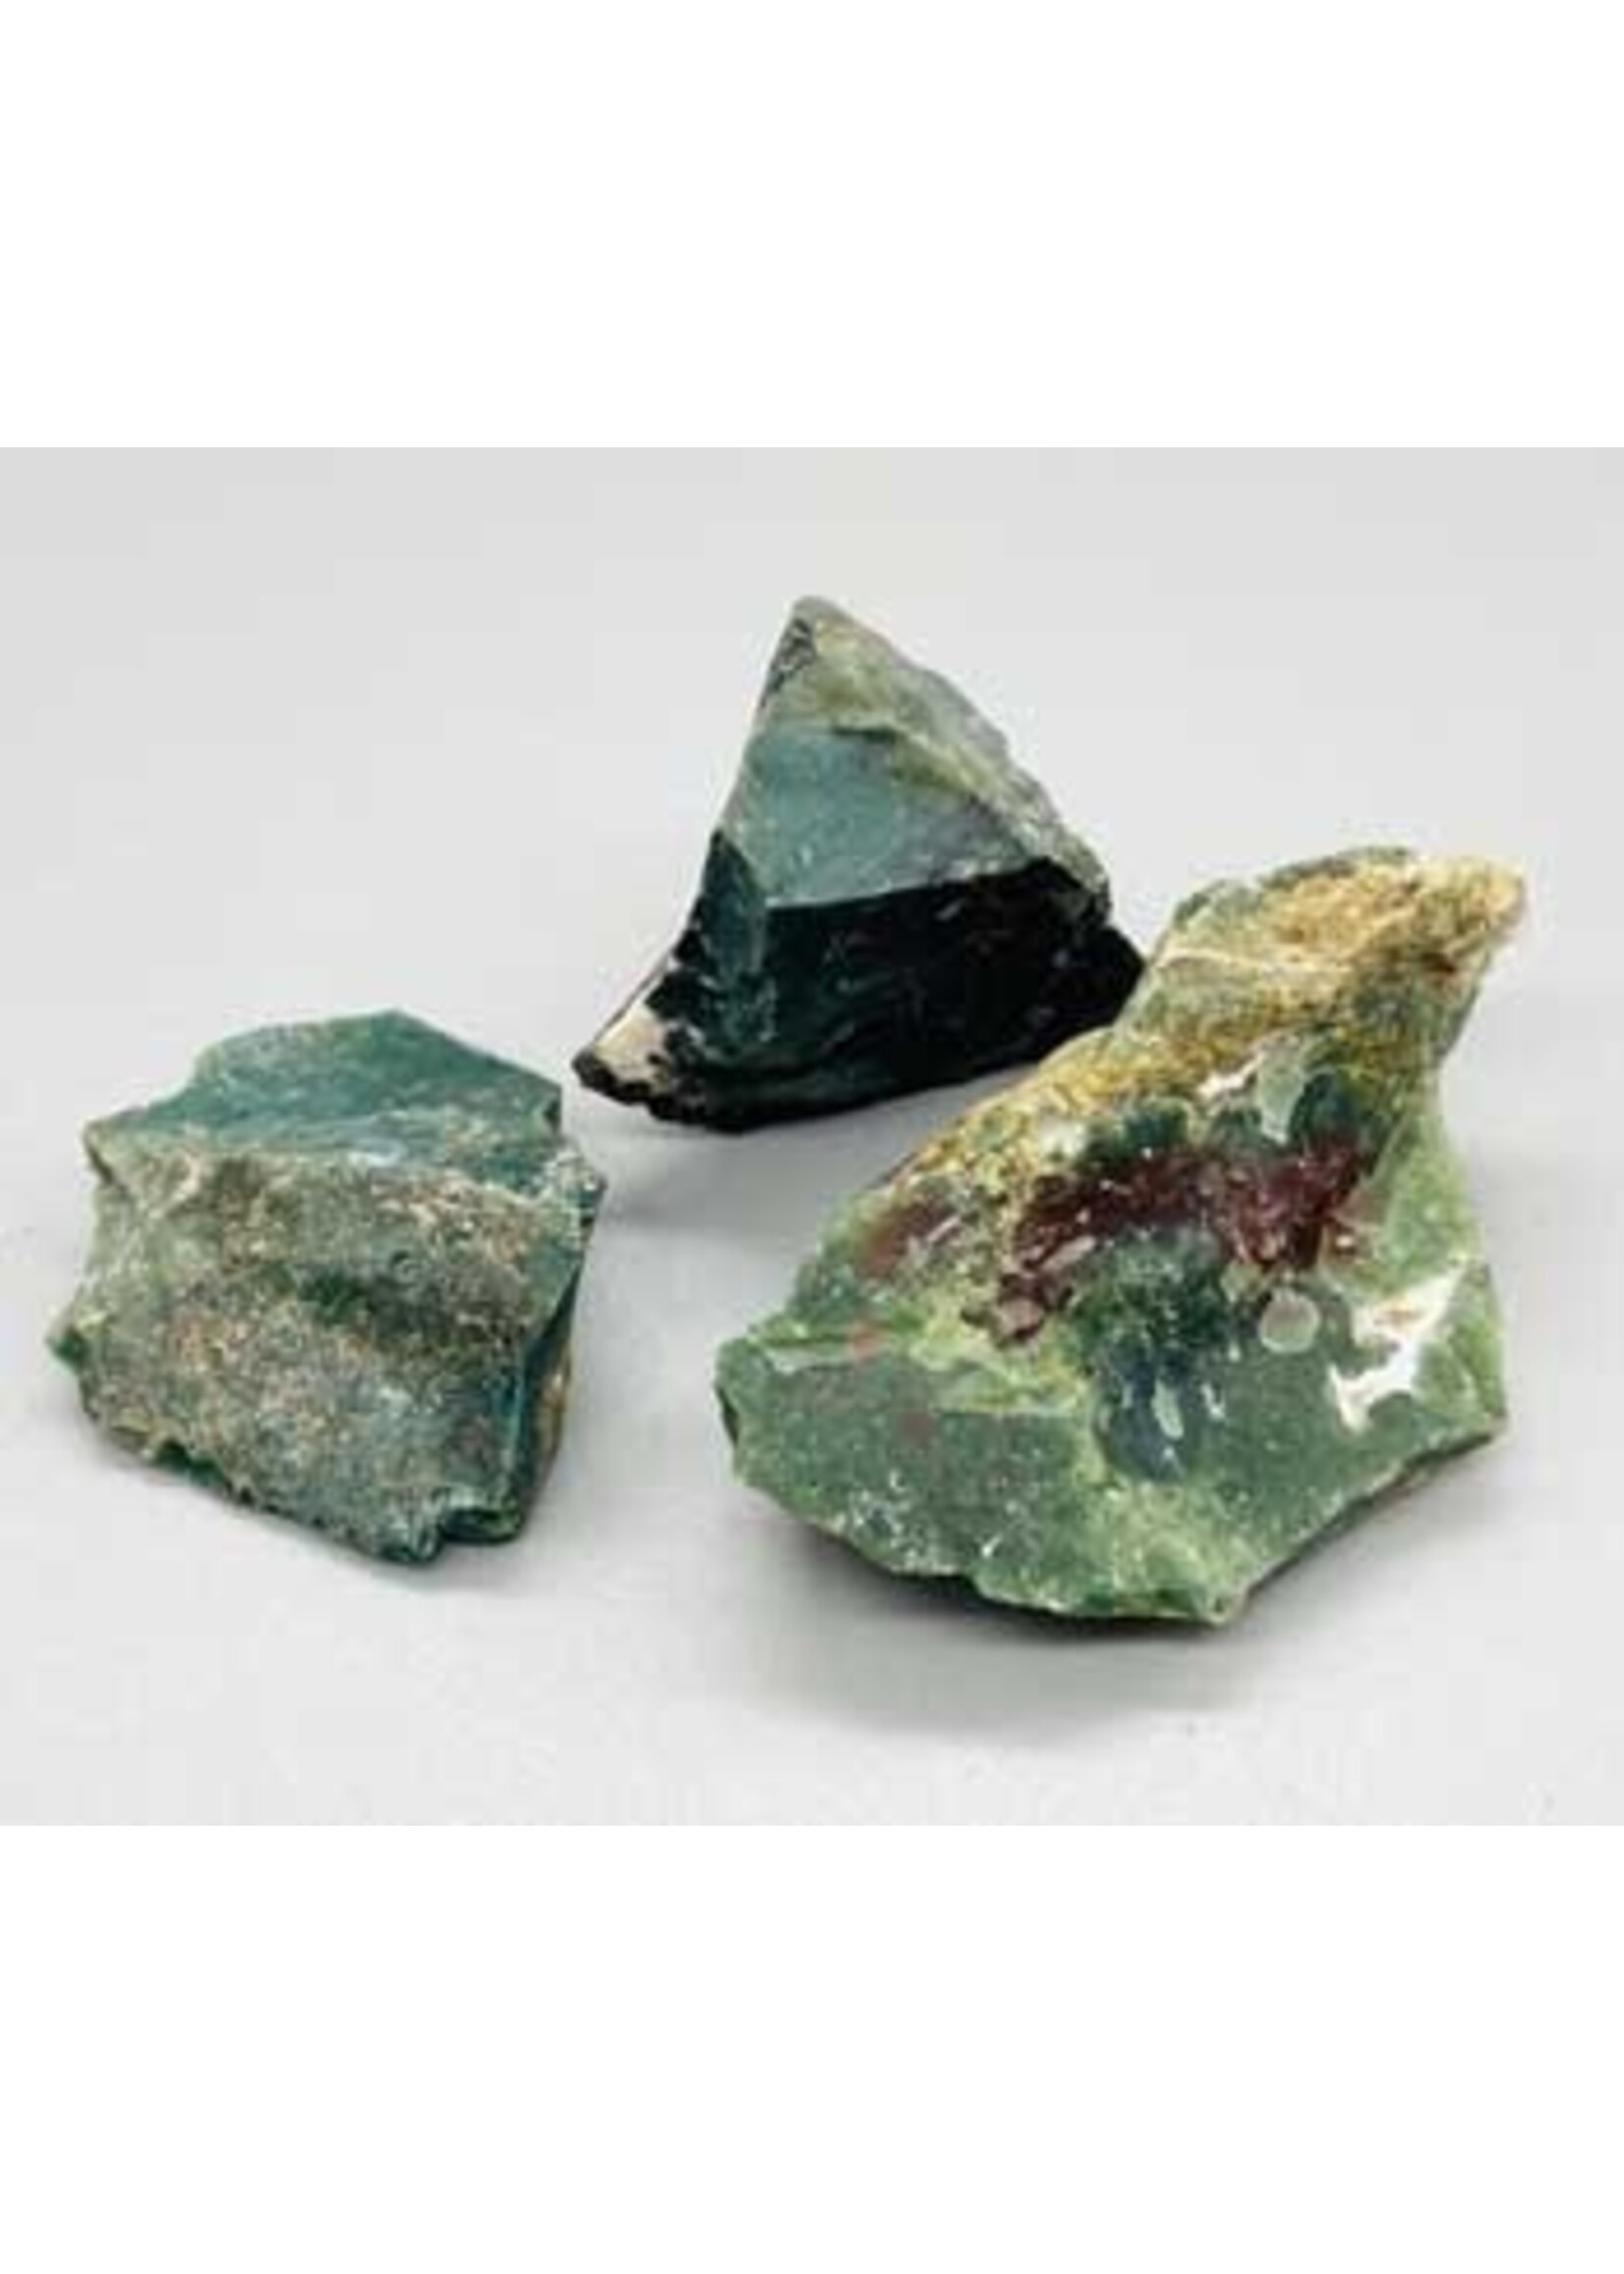 Bloodstone - Raw Natural